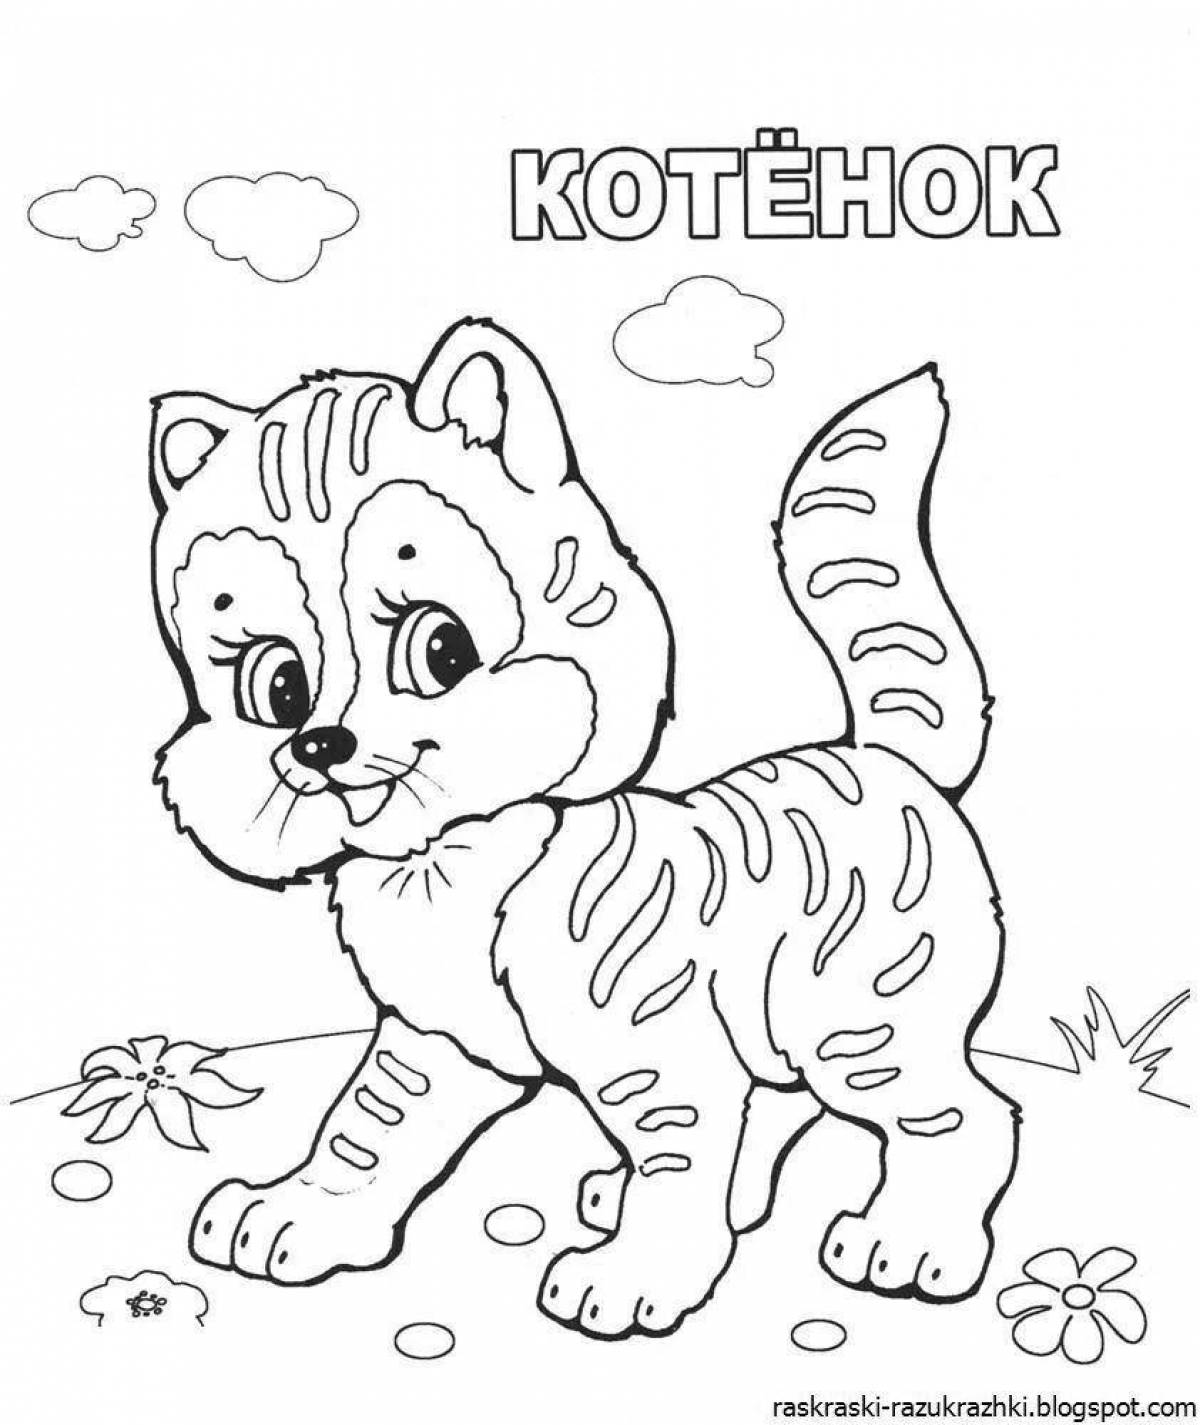 Adorable animal coloring pages for 7 year olds